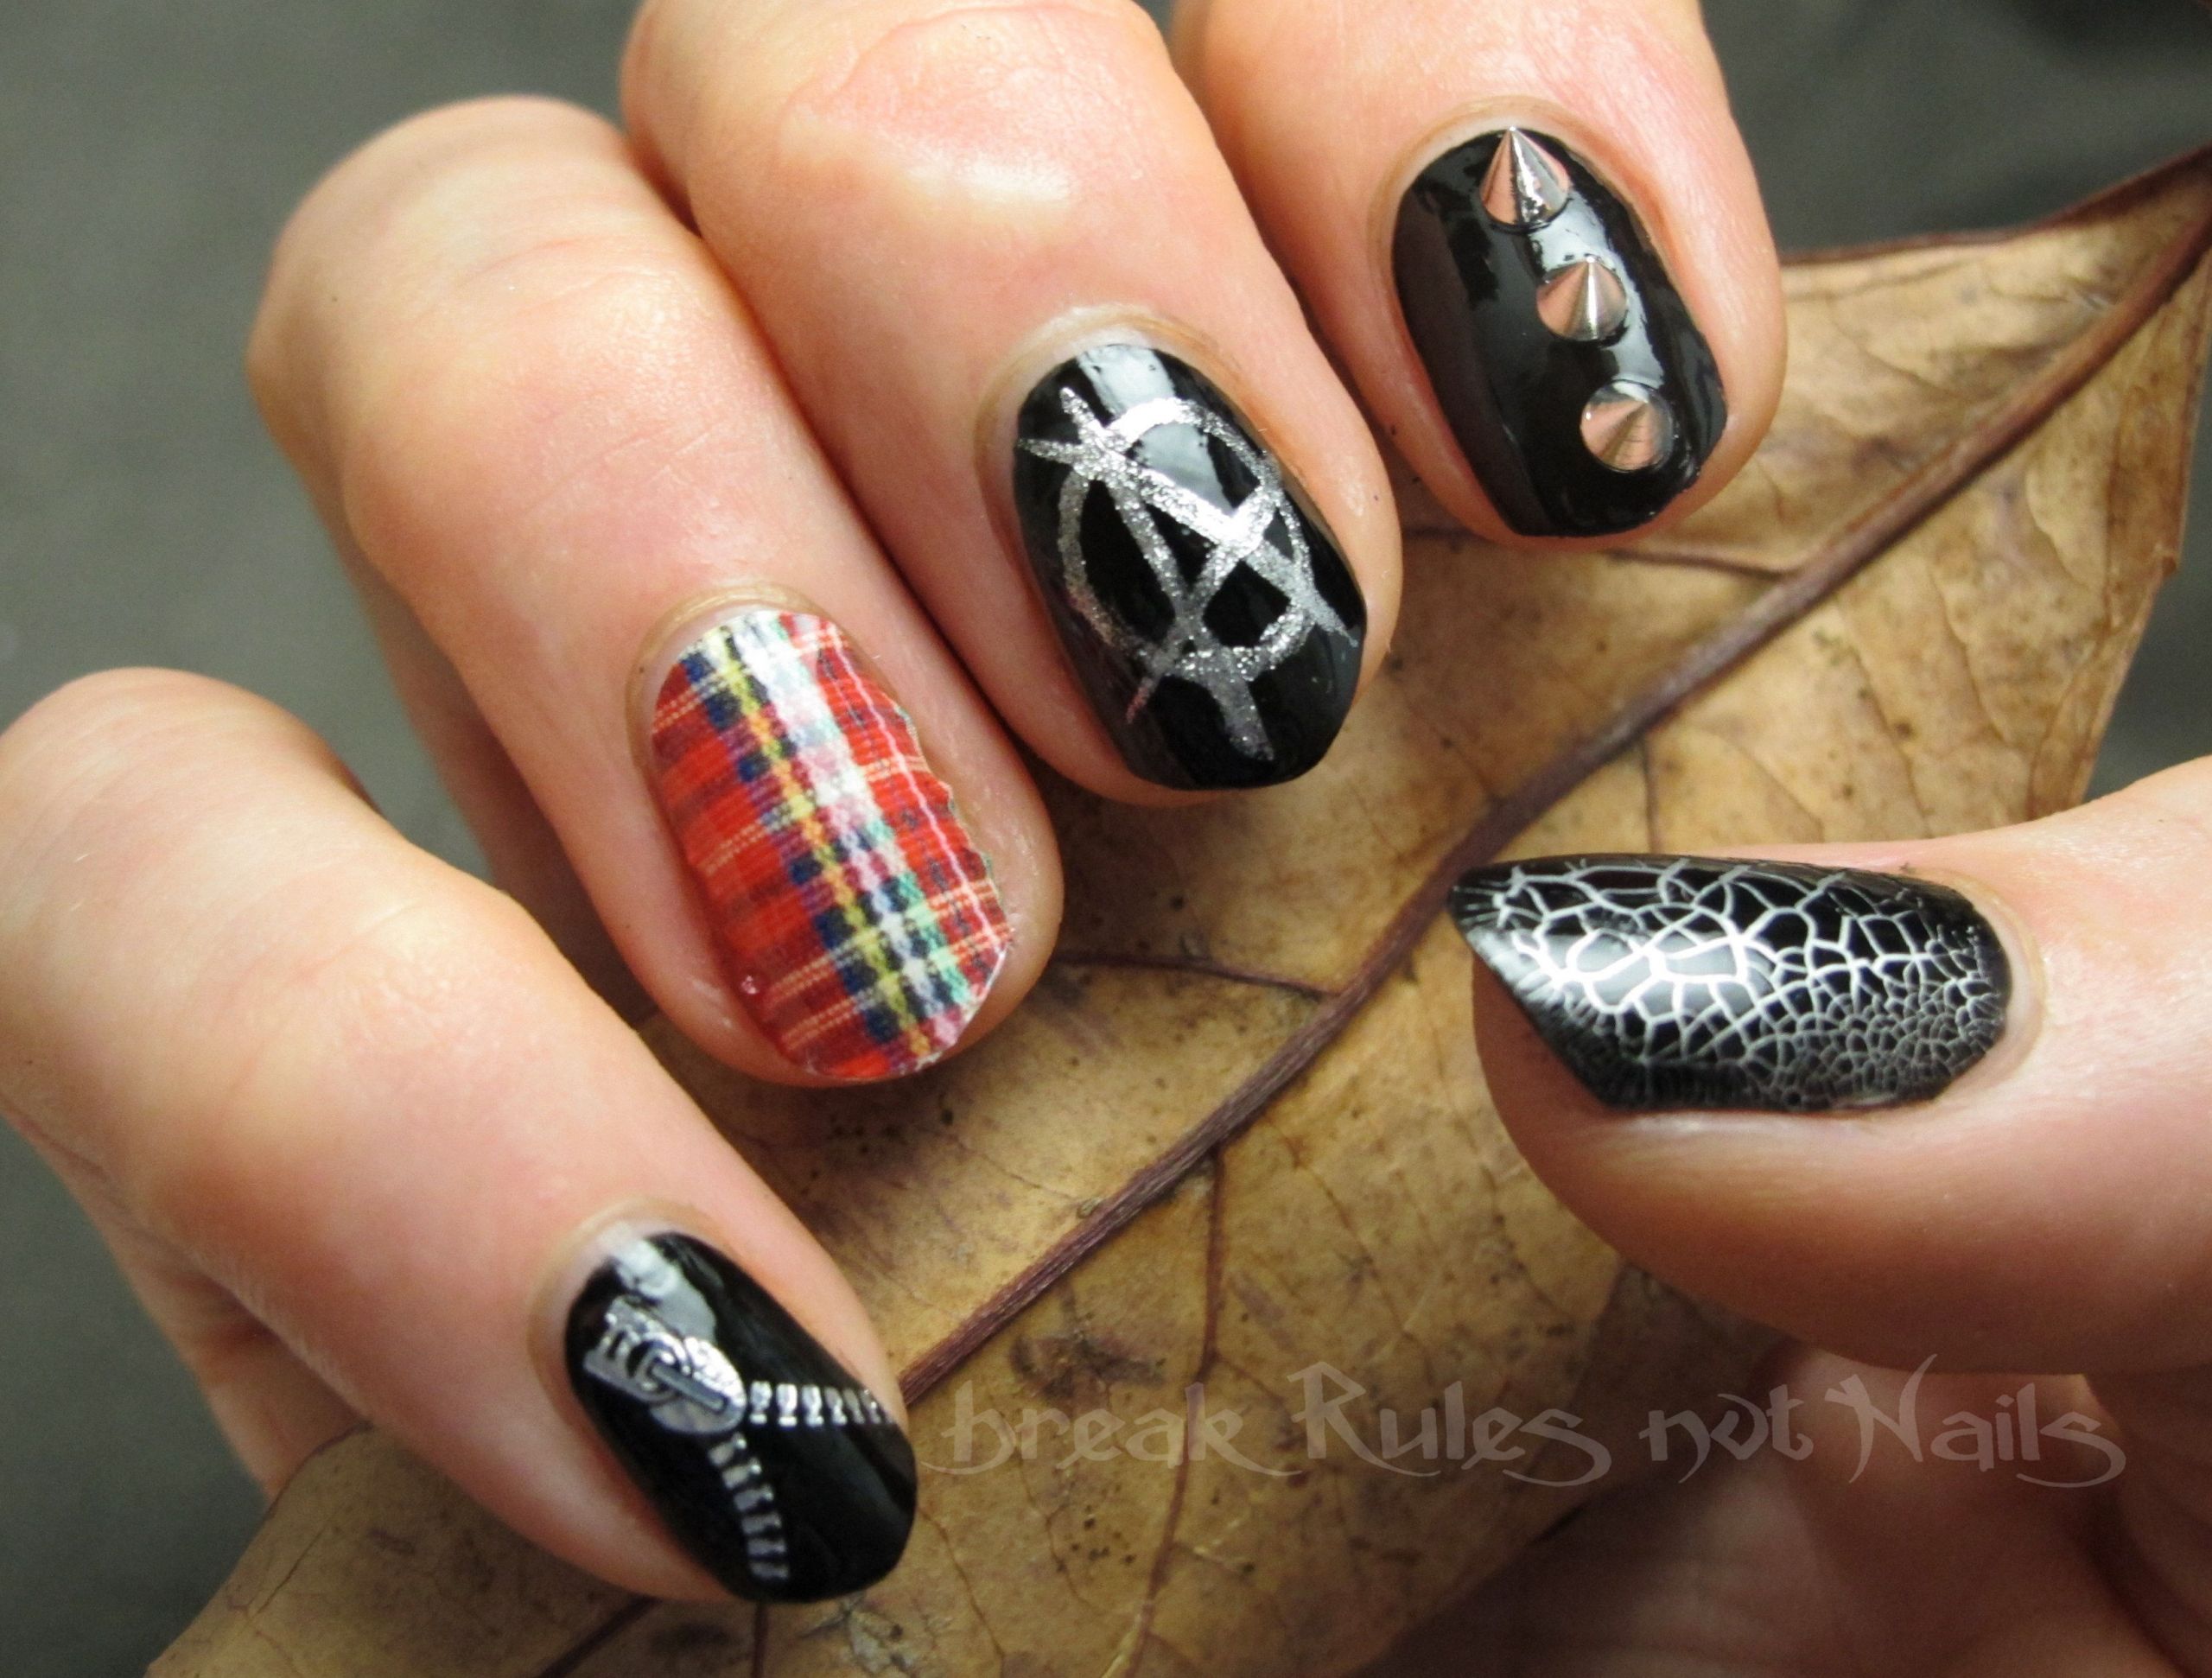 4. "Black and White Punk Rock Nails" - wide 7